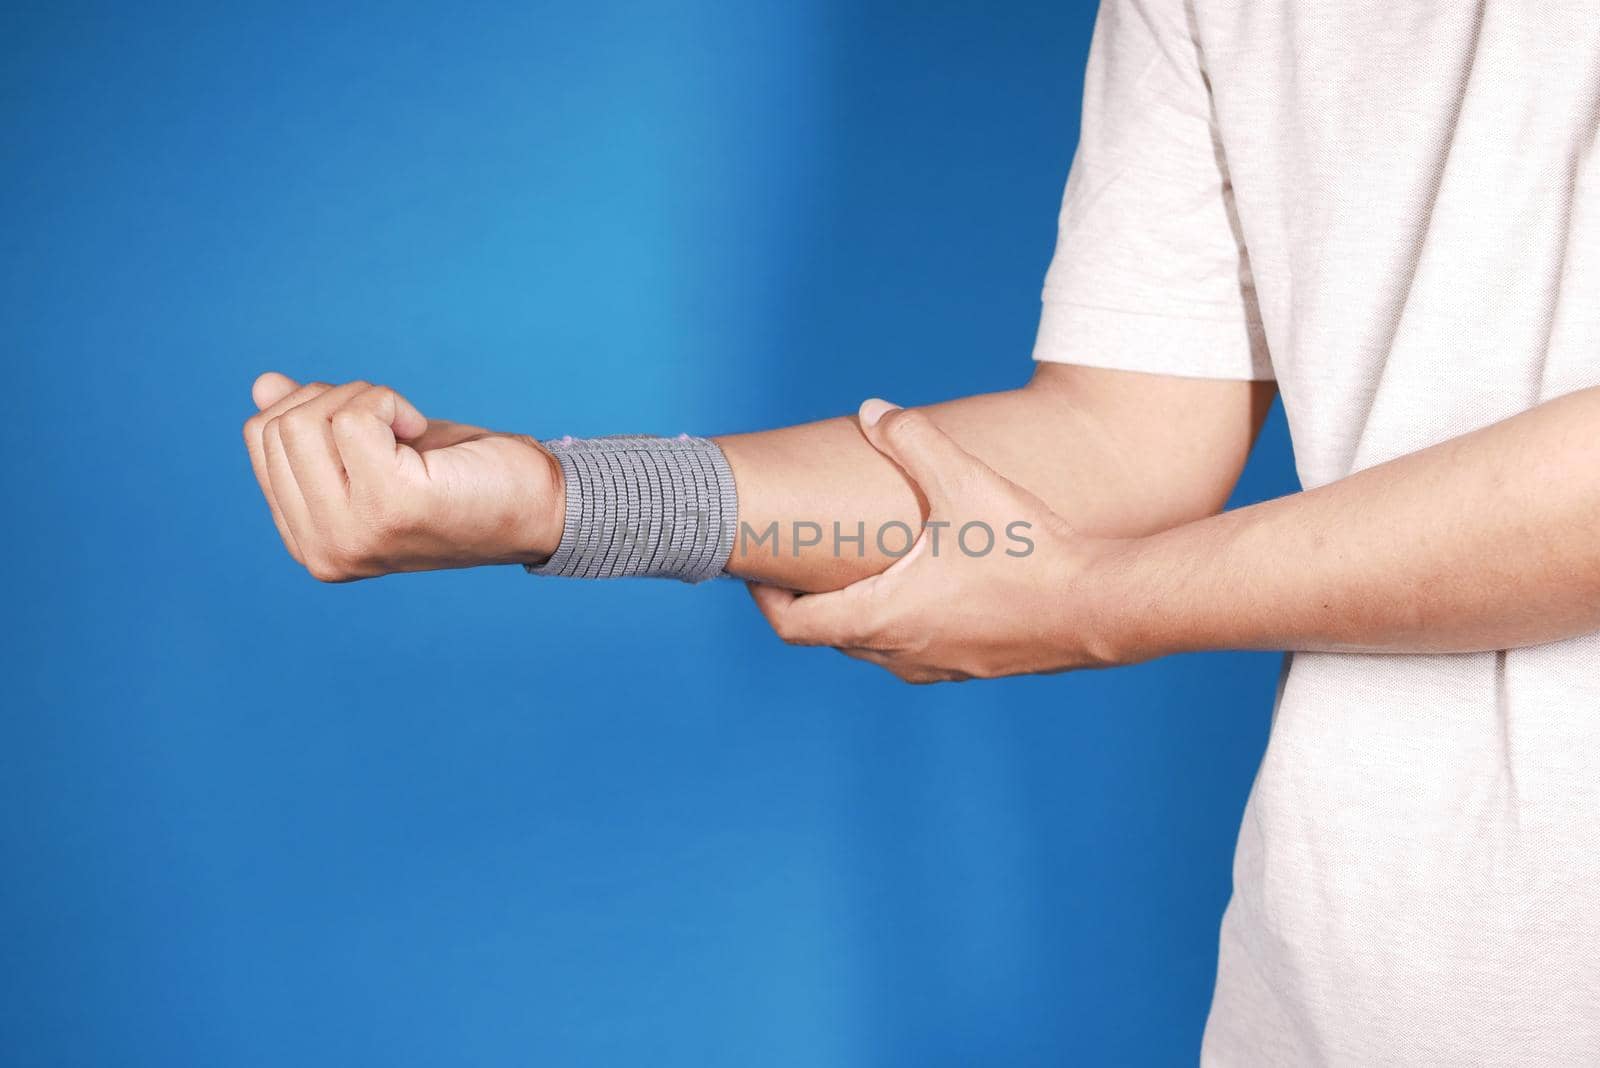 hand with wrist support against blue background